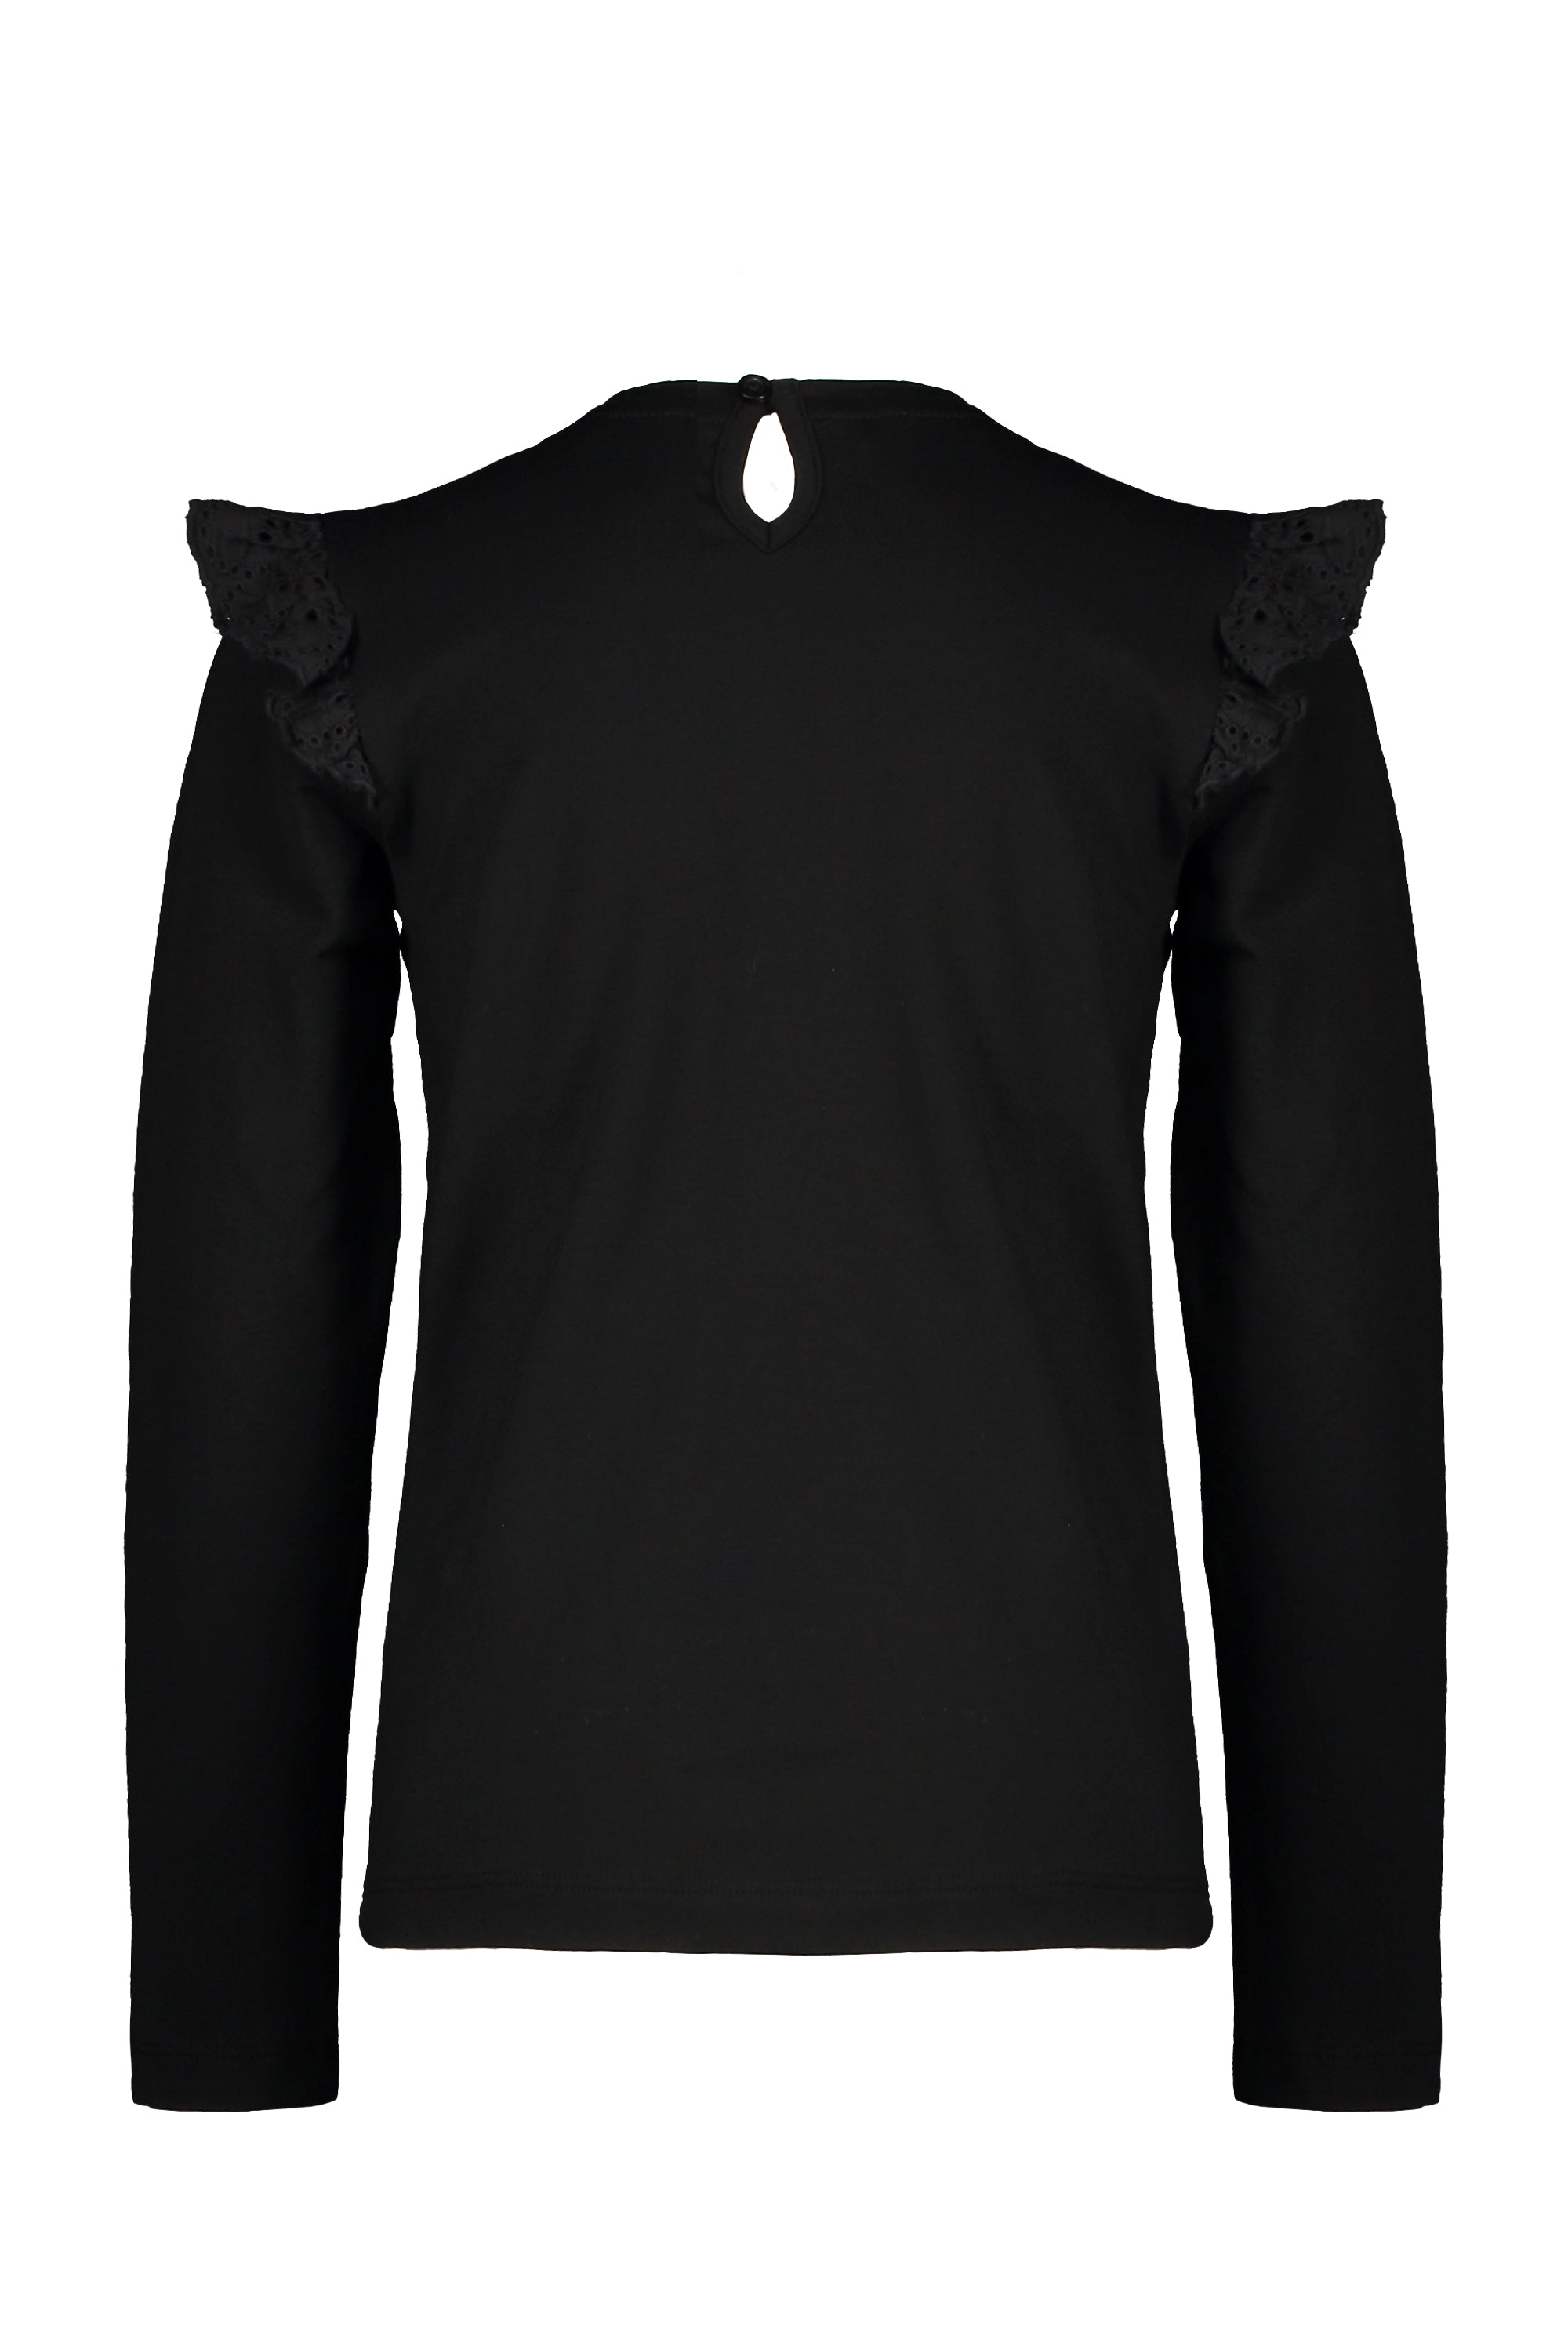 Moodstreet MT top with embroidery contrast